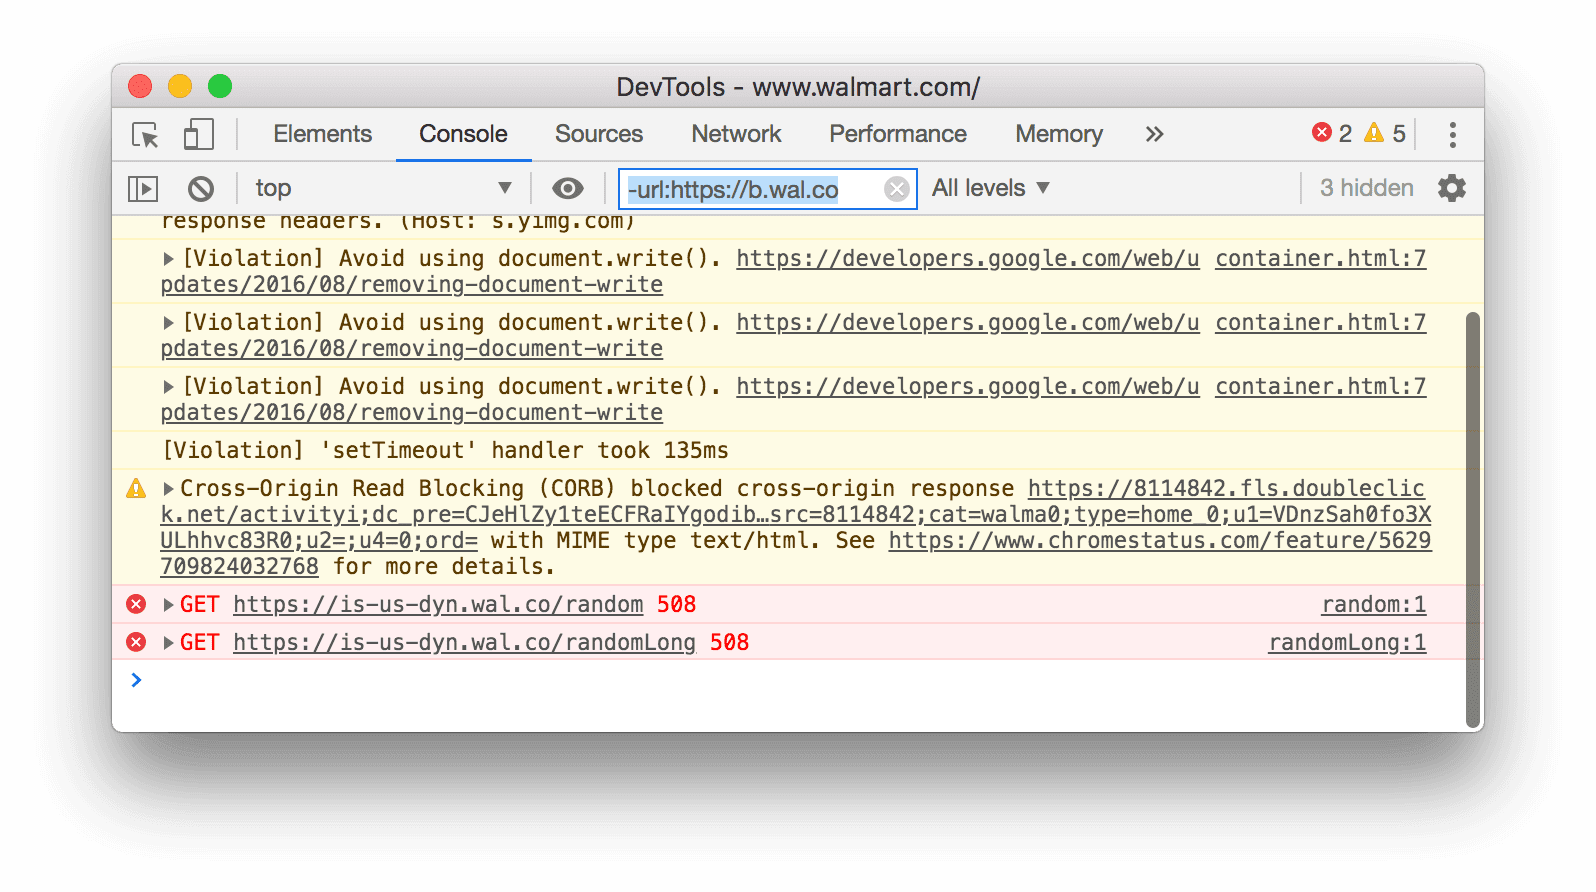 A negative URL filter. DevTools is hiding all messages that match the specified URL.